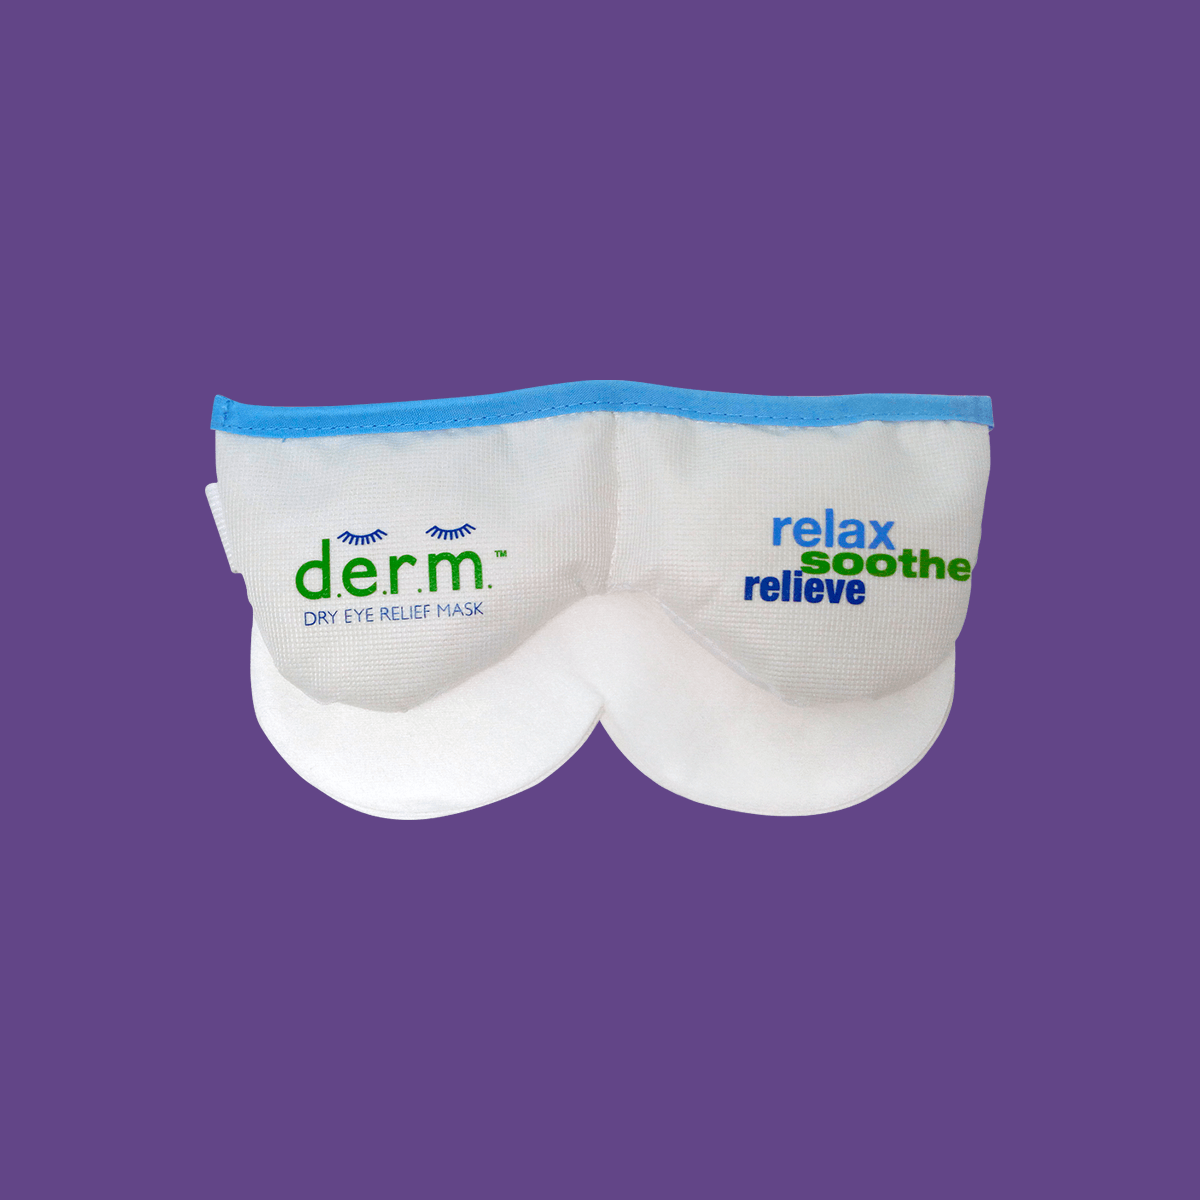 EyeEco D.E.R.M. Heat Mask for Mild Dry Eye Relief - DryEye Rescue Store